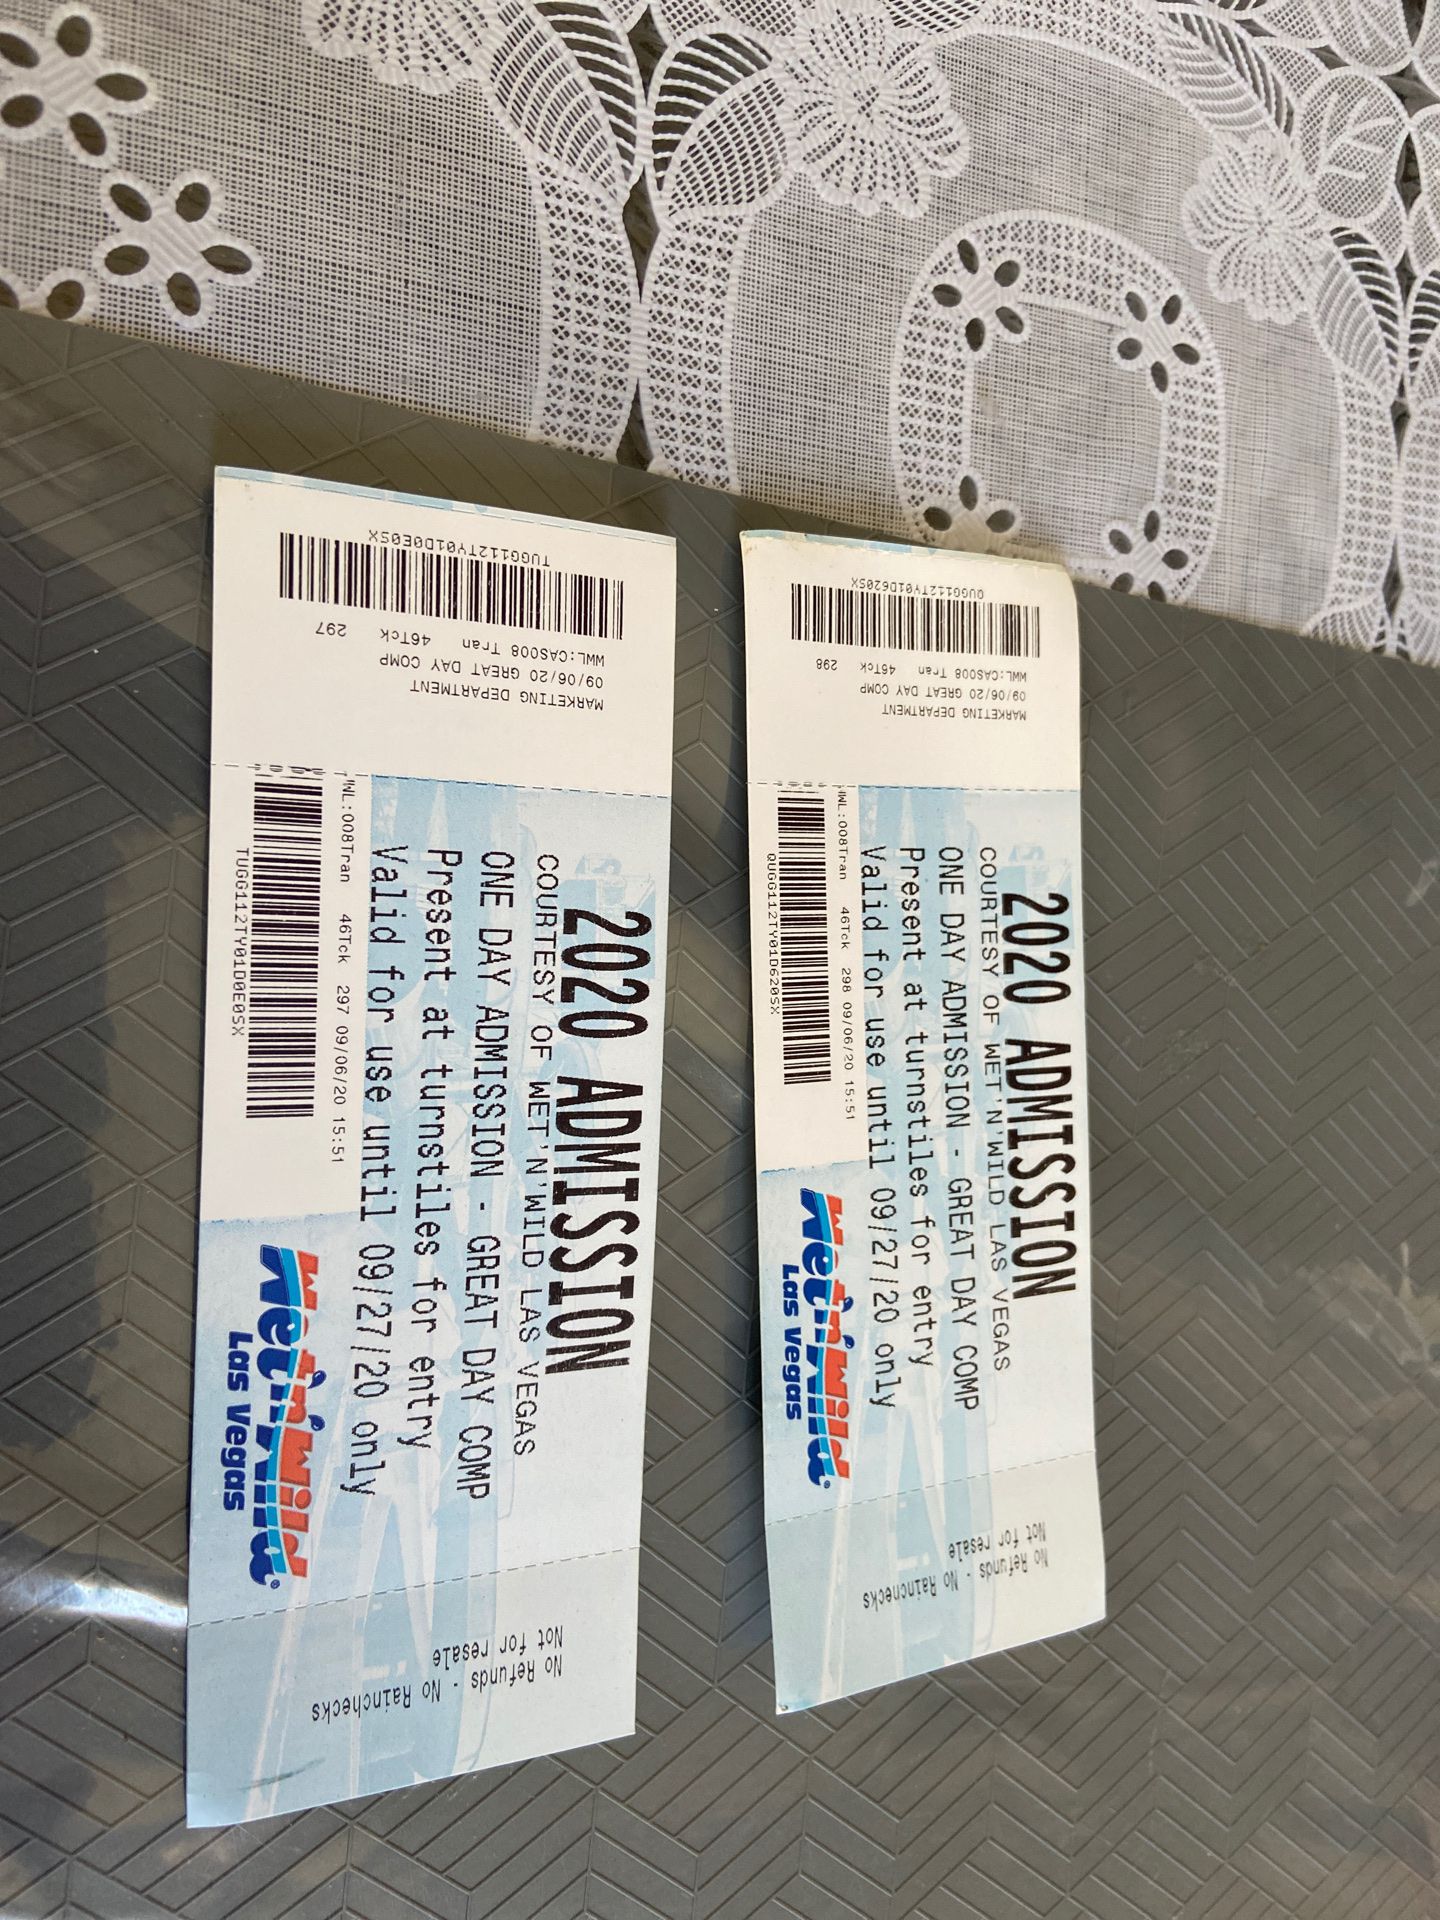 2 tickets for wet and wild valid until 09/27/2020 $25 each